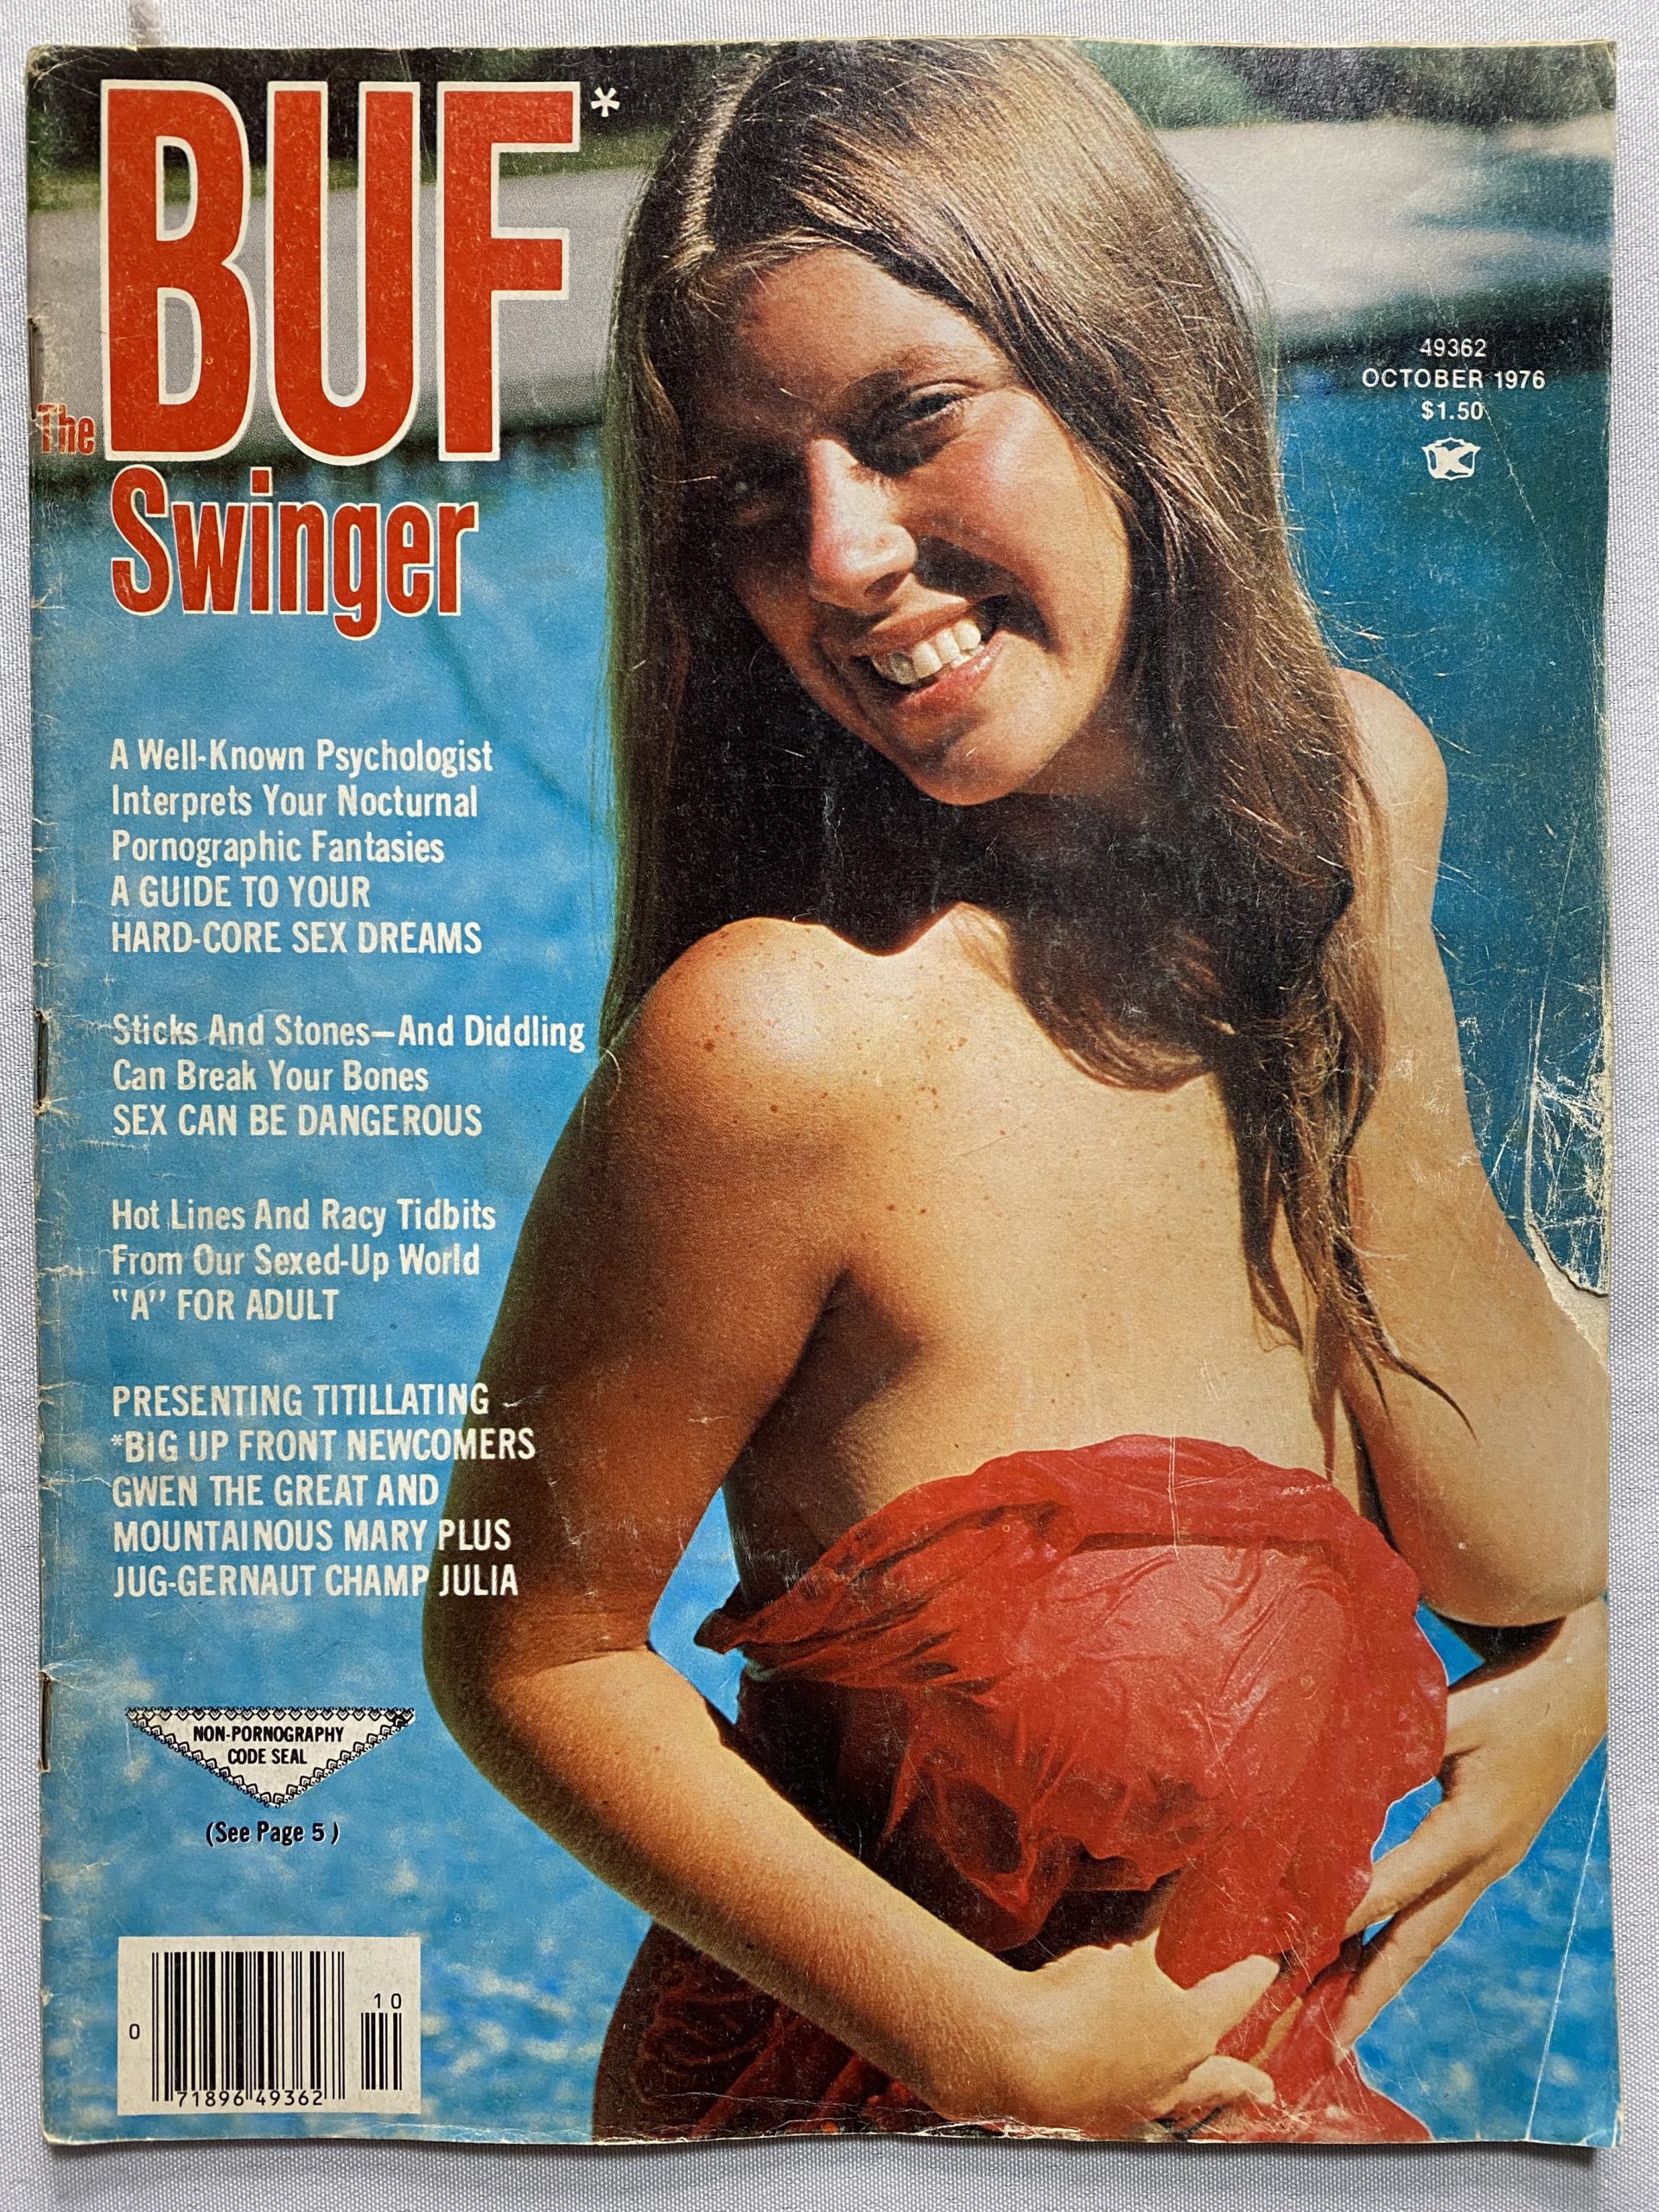 The Buf Swinger October 1976 image